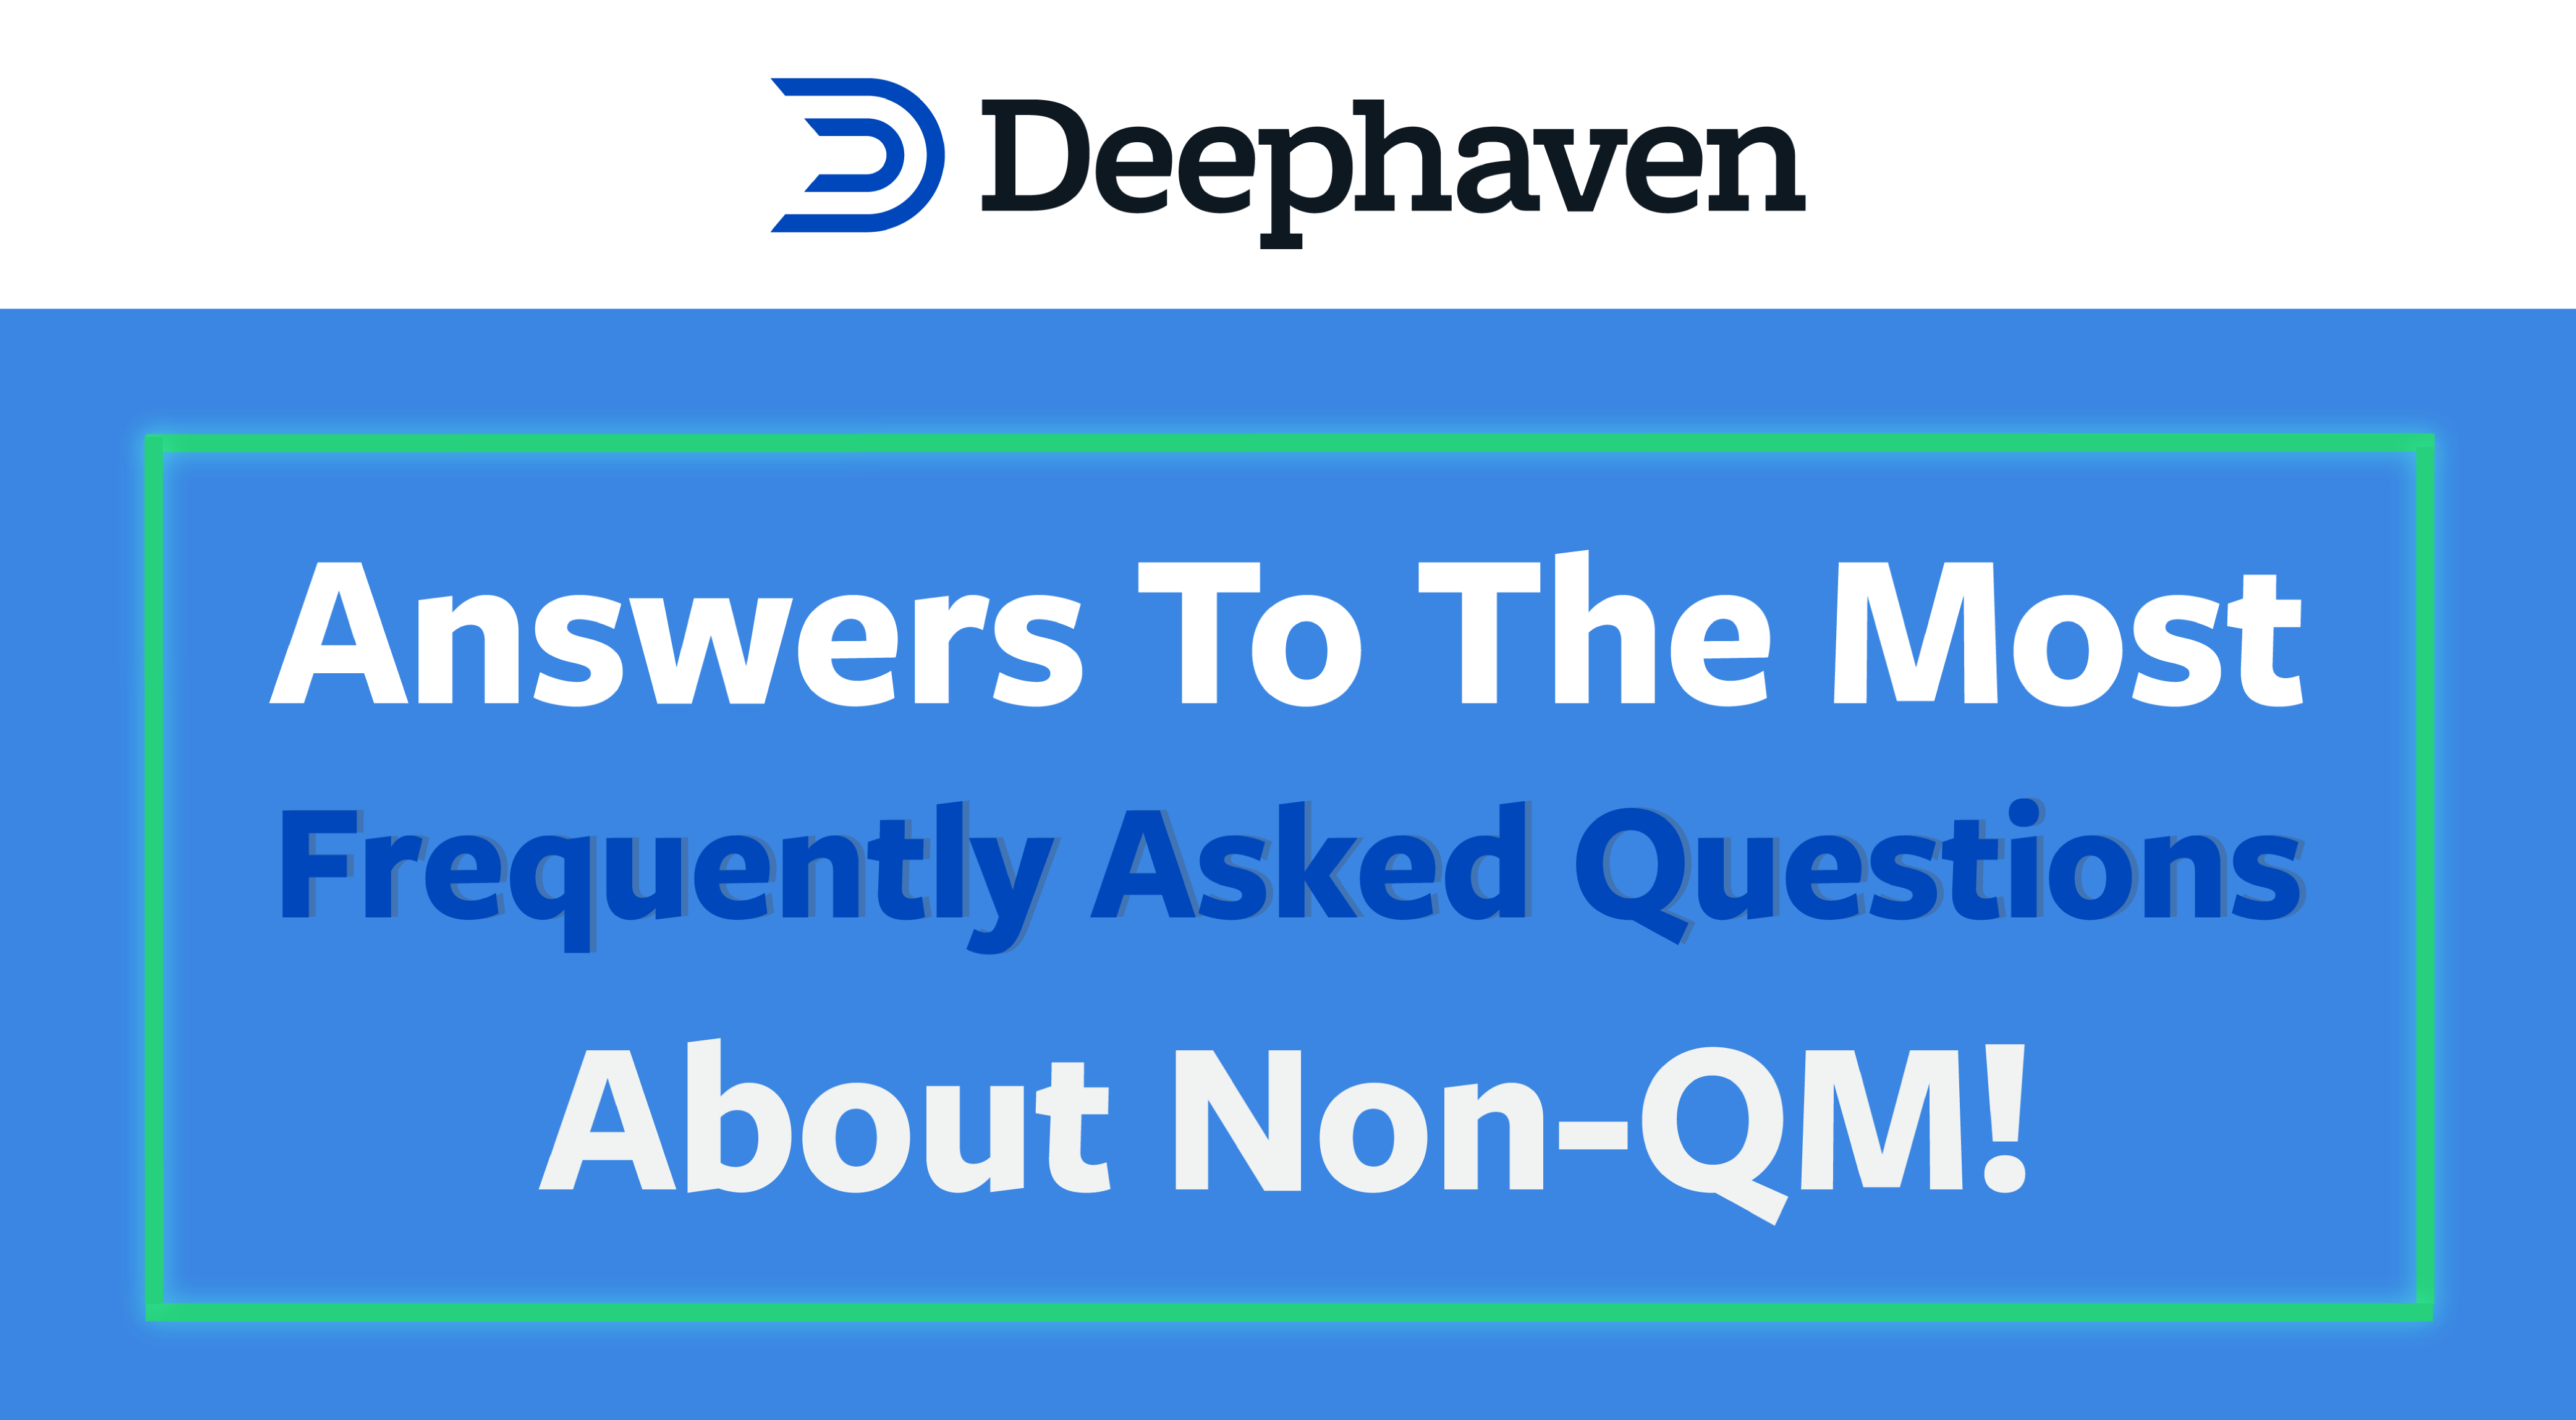 Answers To The Most Frequently Asked Questions About Non-QM Mortgages